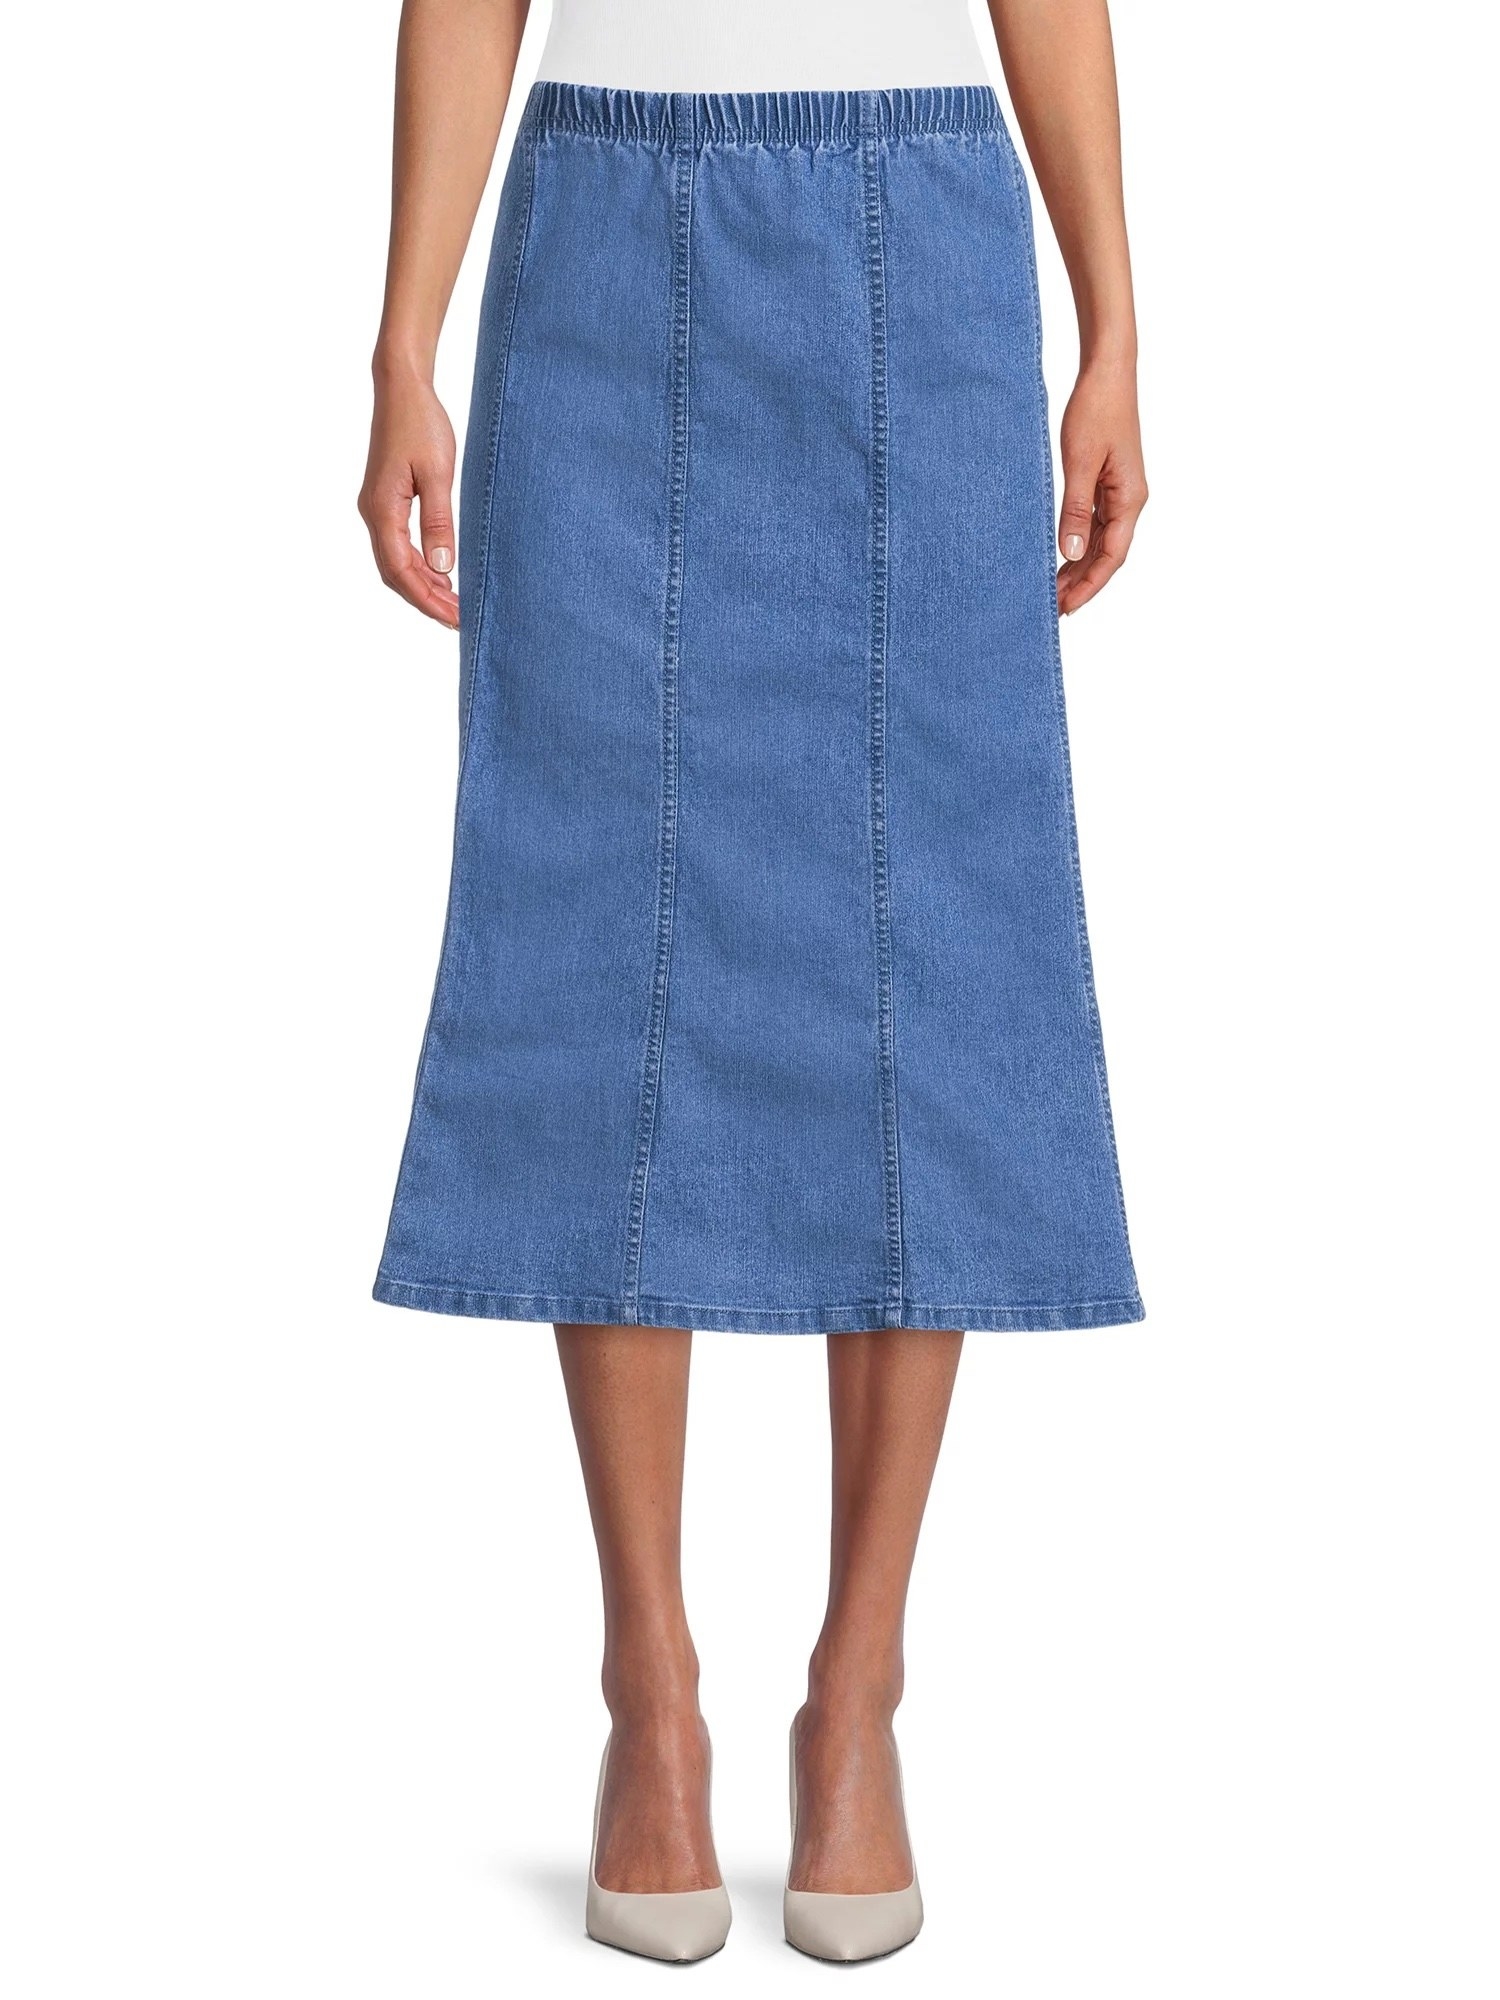 Model wearing mid wash denim skirt with white shirt and shoes